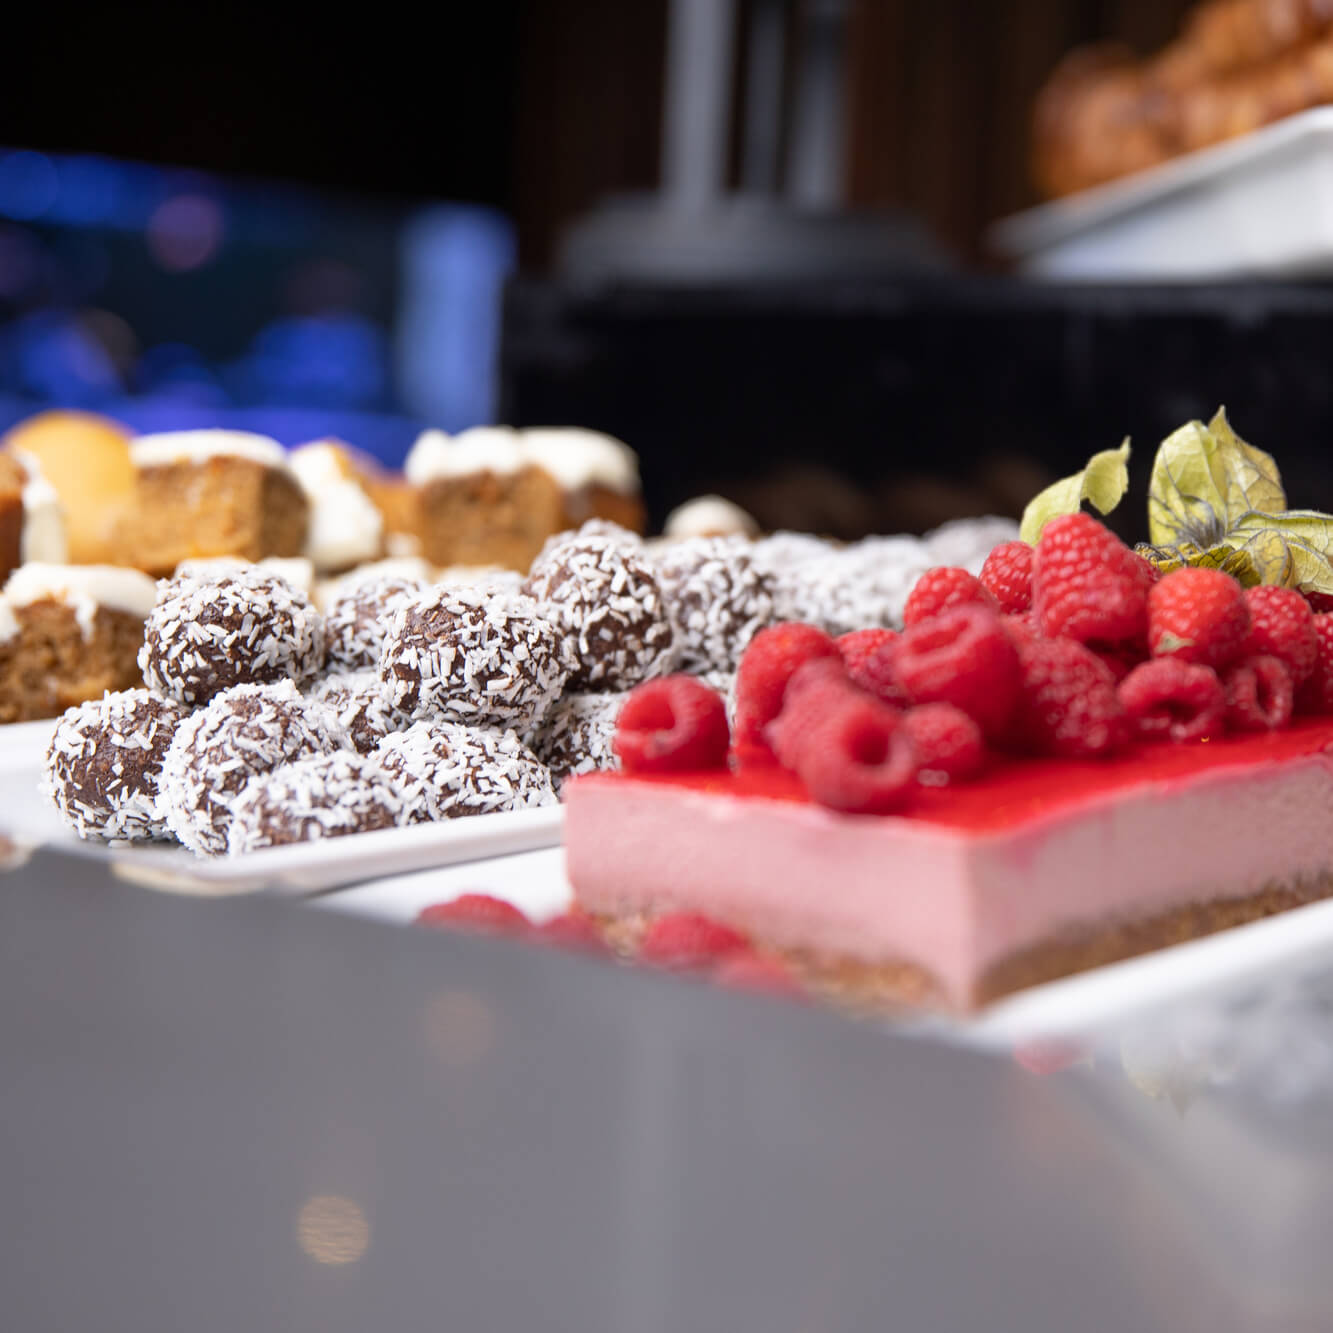 Cakes on trays ready to be served at restaurant 1803 at Quality Hotel Carlia in Uddevalla, Sweden.